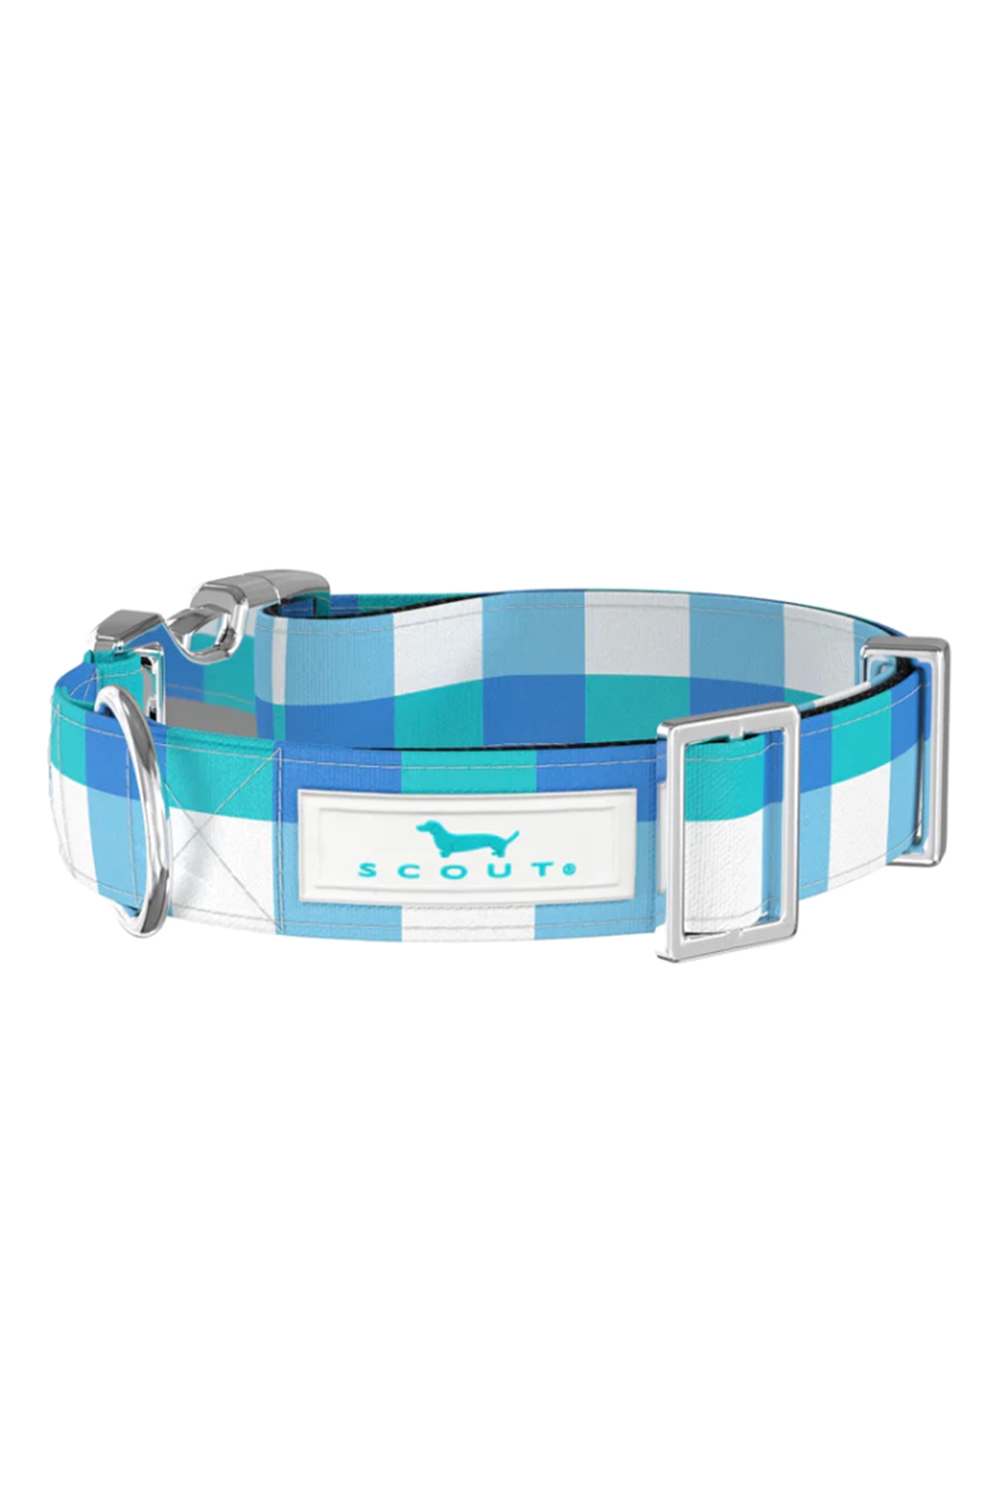 SCOUT Dog Collar - "Friend of Dorothy" SP24